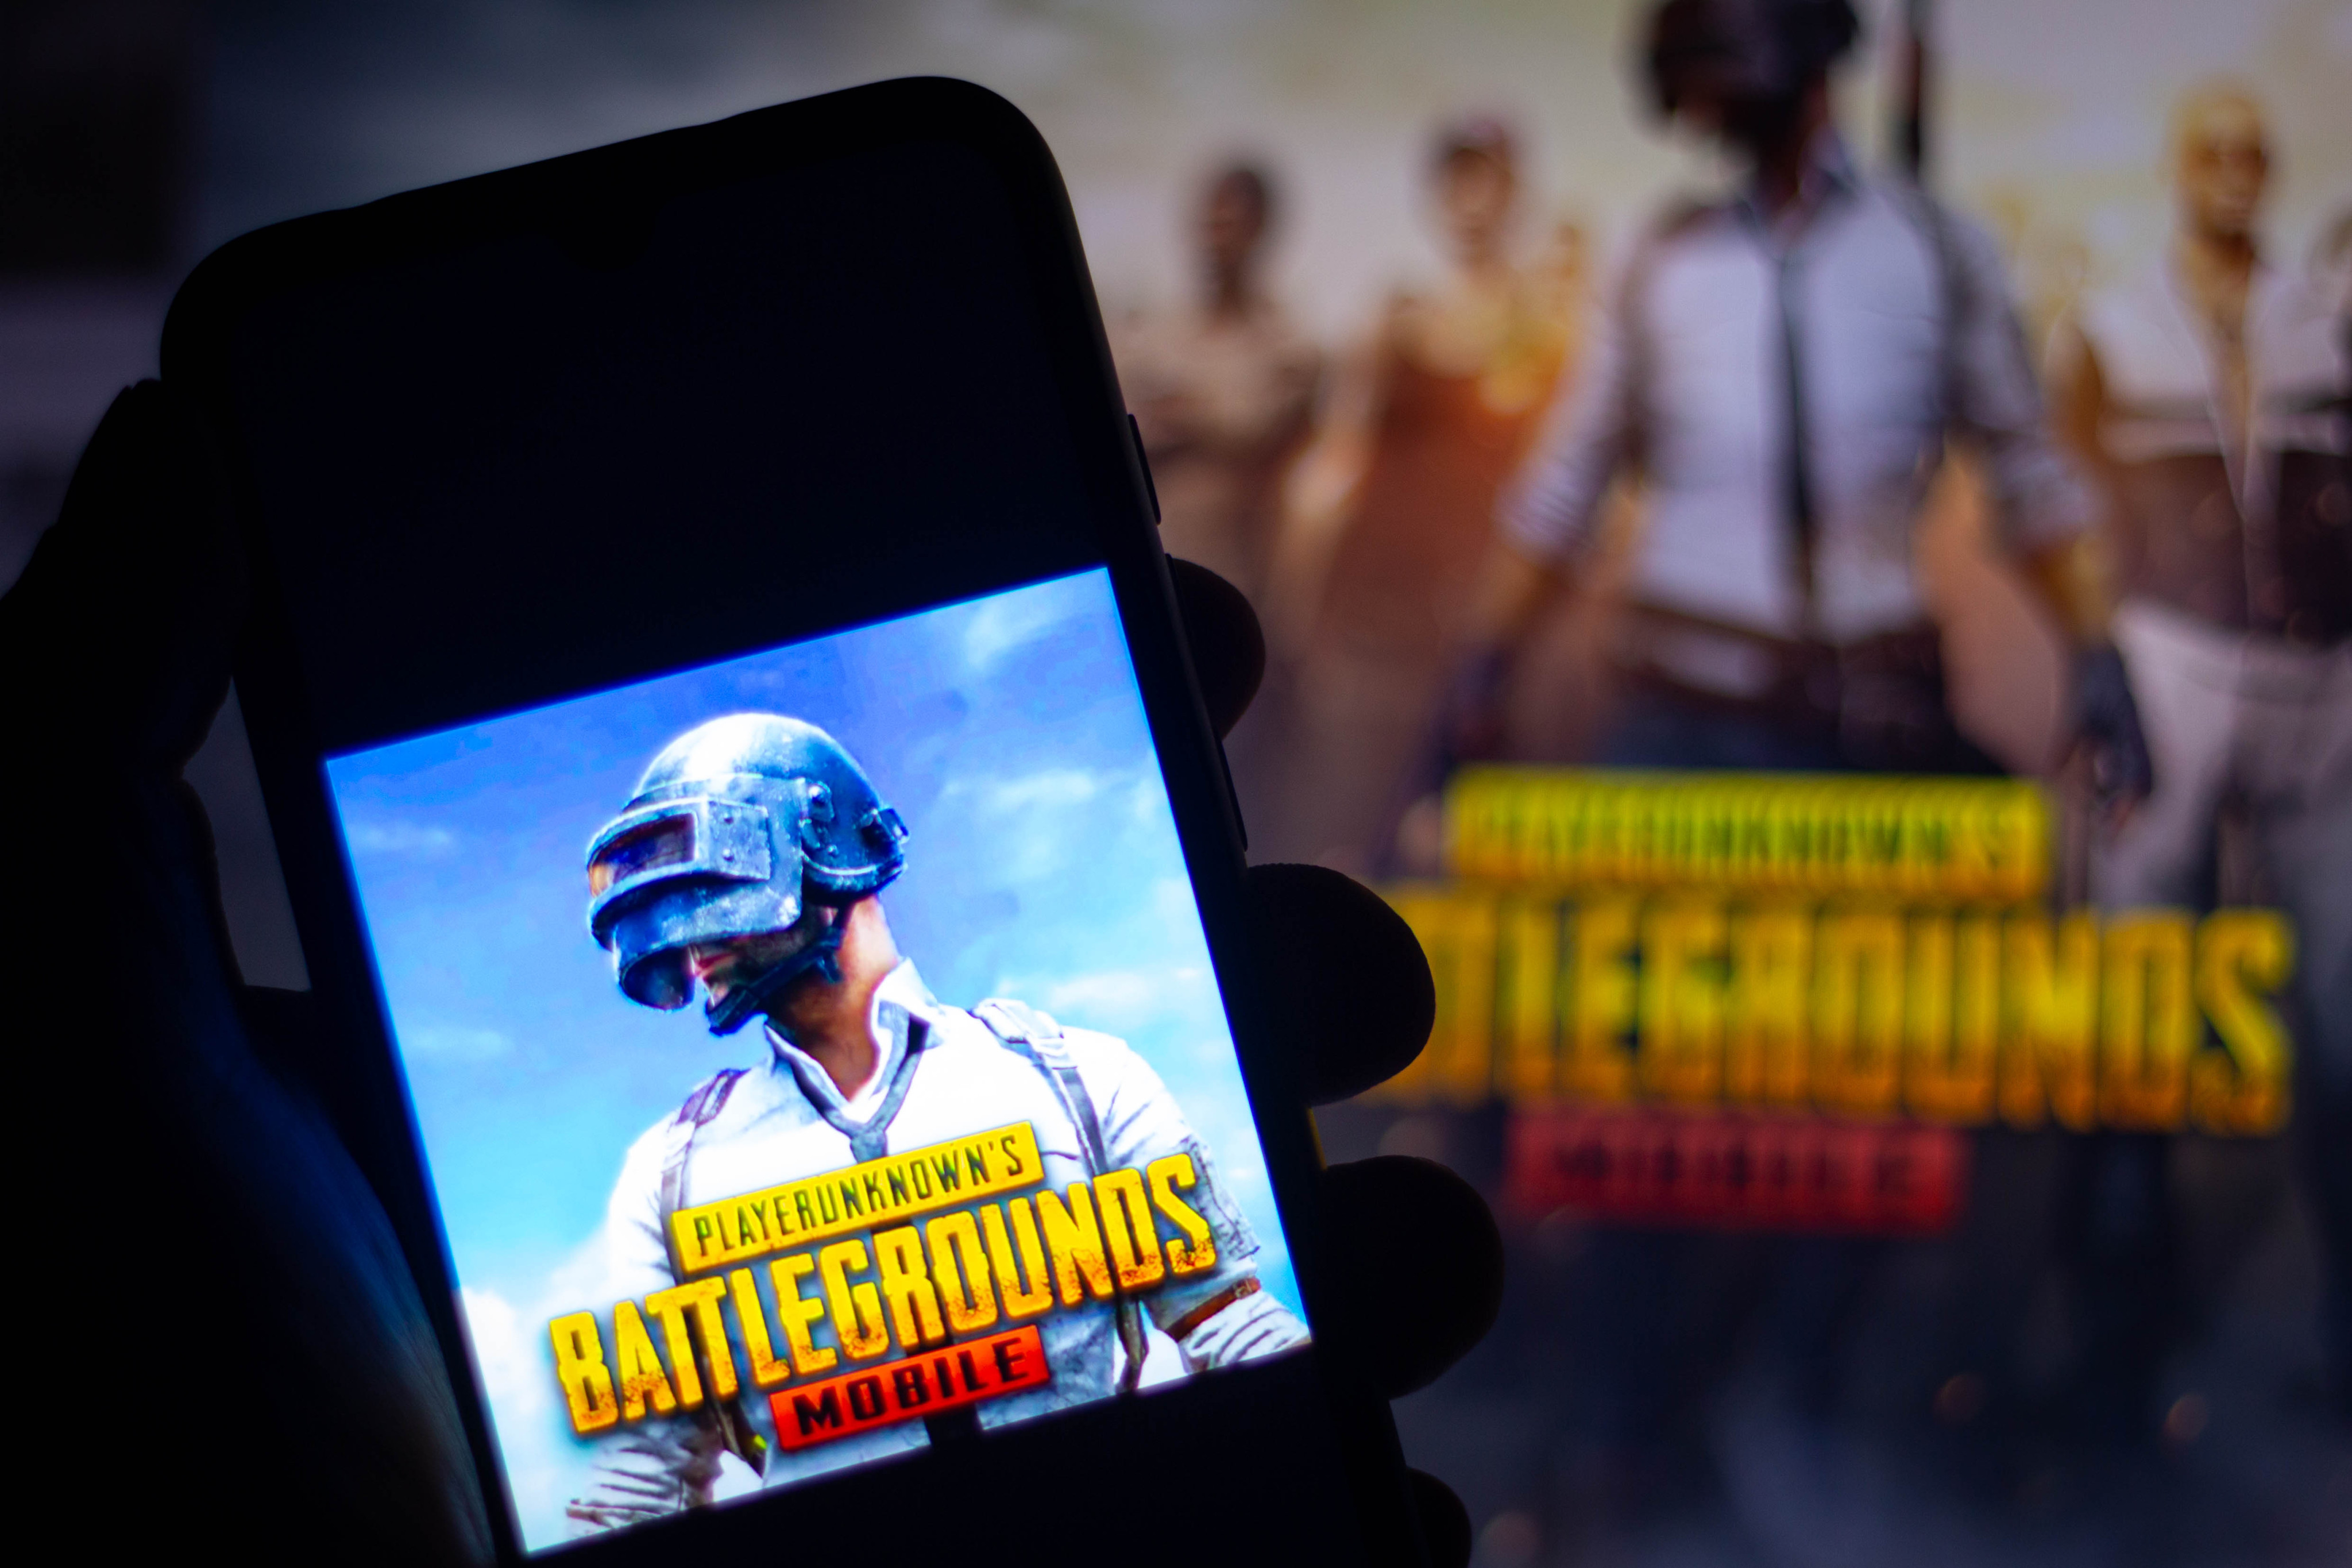 A Pakistani woman and an Indian man struck a connection when they met playing PUBG,. Photo: Shutterstock